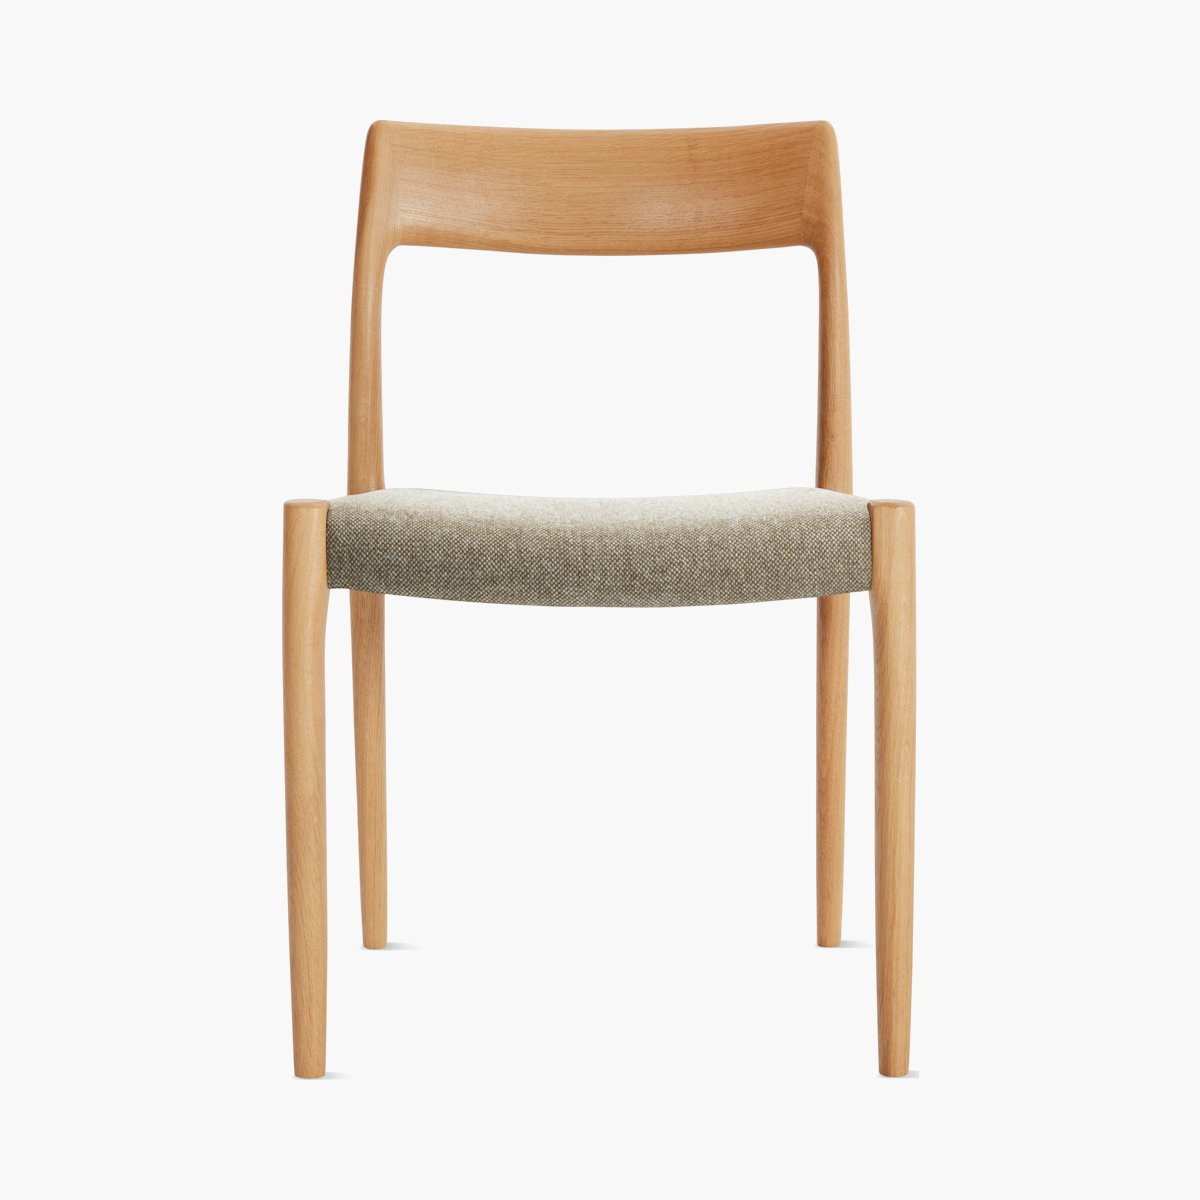 Moller Model 77 Side Chair with Upholstered Seat